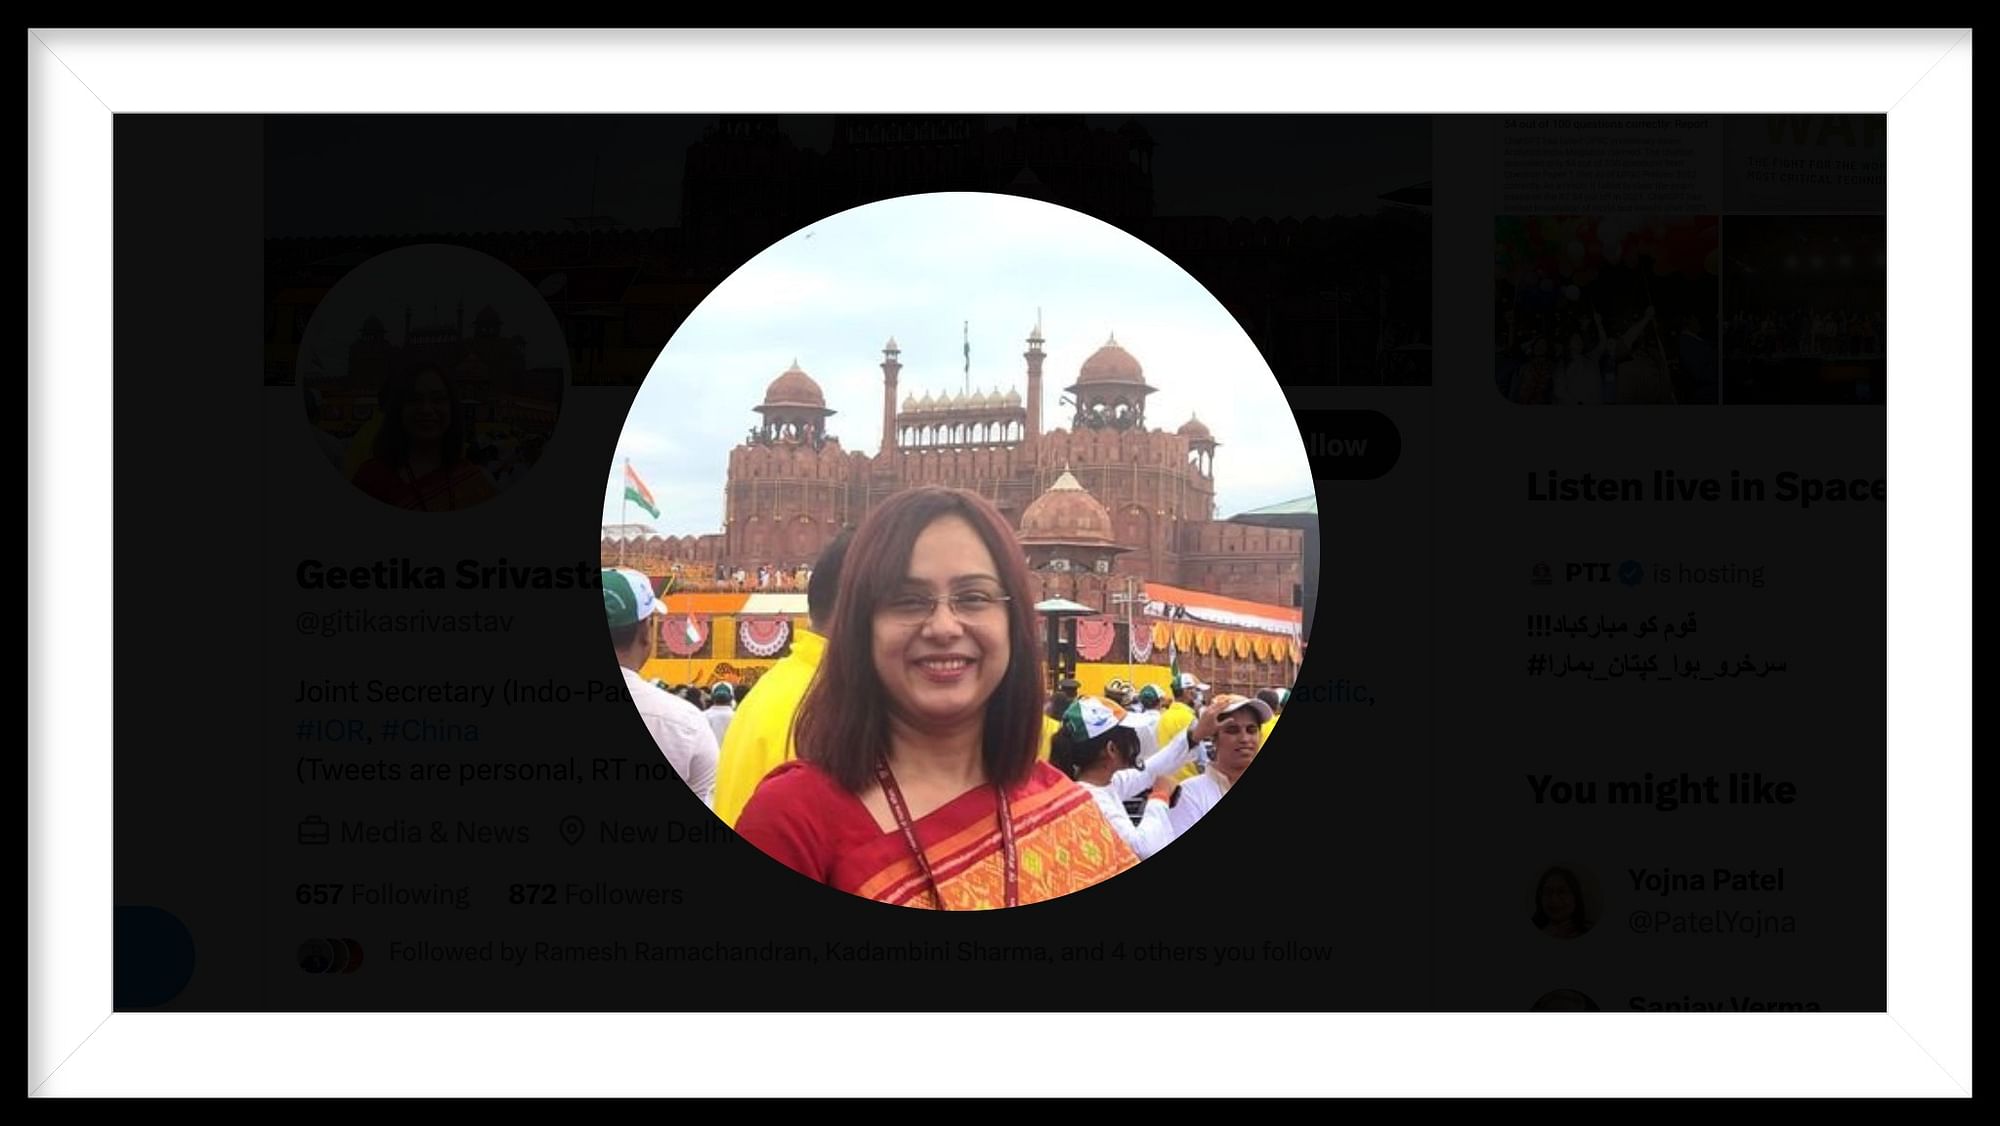 <div class="paragraphs"><p>Geetika Srivastava, currently serving in the Indo-Pacific division of the Ministry of External Affairs (<a href="https://www.thequint.com/news/india/parliamentary-committee-external-affairs-criticises-foreign-ministry-mea-jaishankar">MEA</a>), will be the new chargé d'affaires at its High Commission in Islamabad, becoming the first woman to hold that post. She will succeed Dr M Suresh Kumar who is likely to return to New Delhi.</p></div>